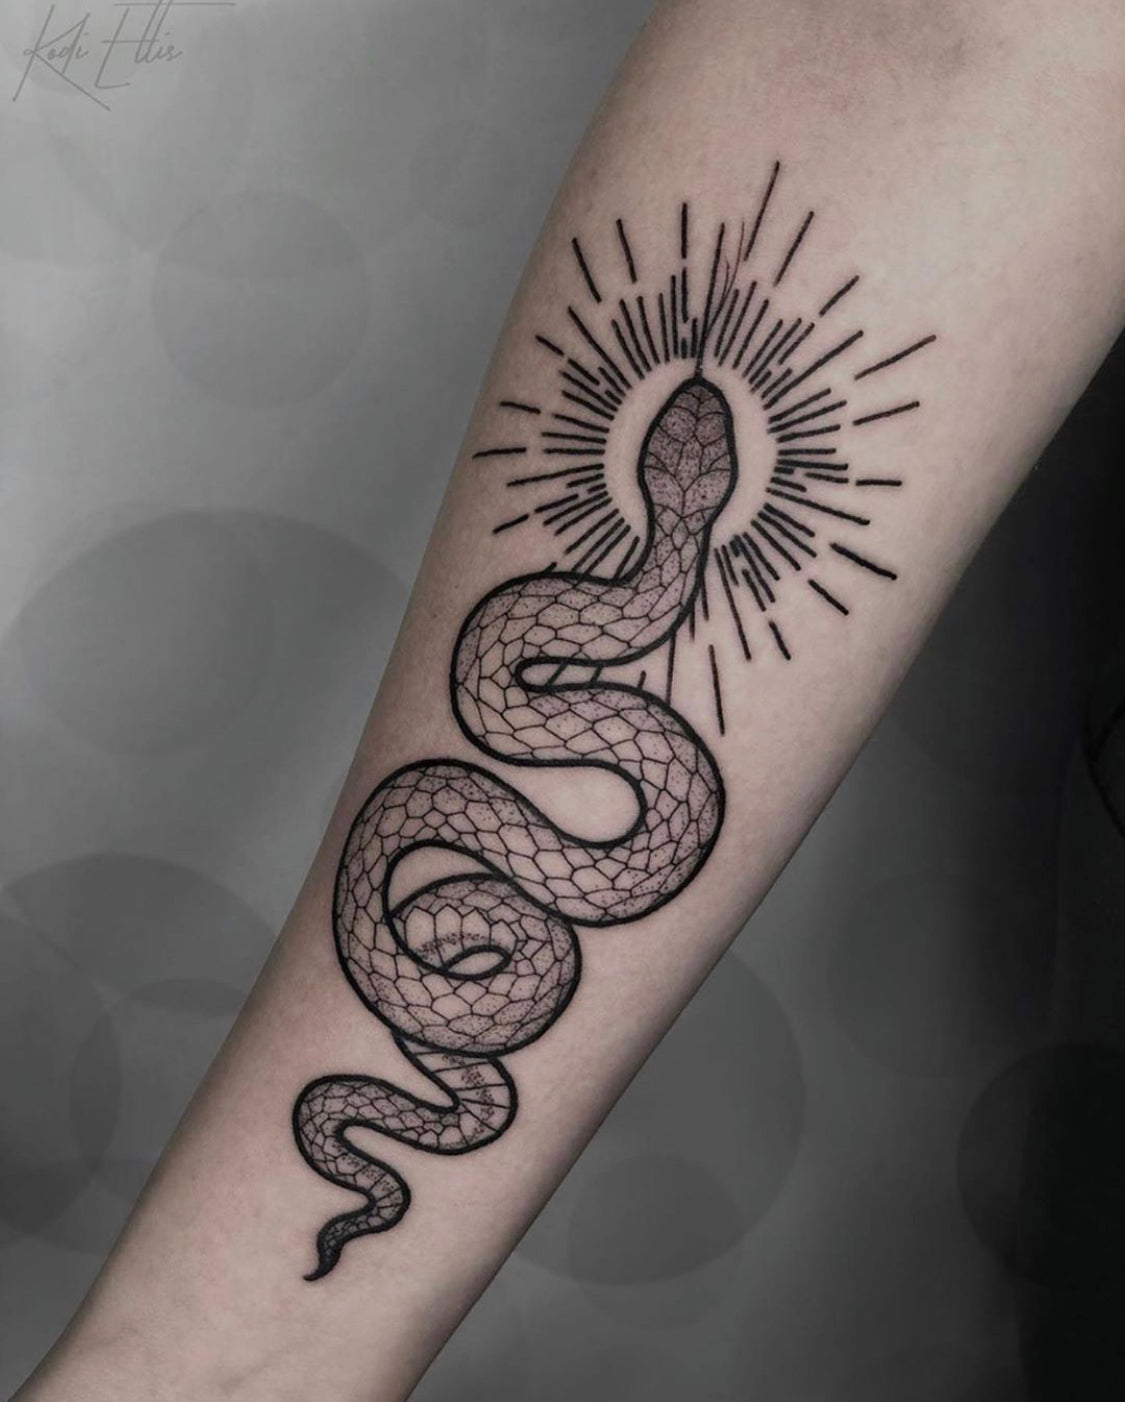 Choosing the Right Tattoo in Four Simple Steps